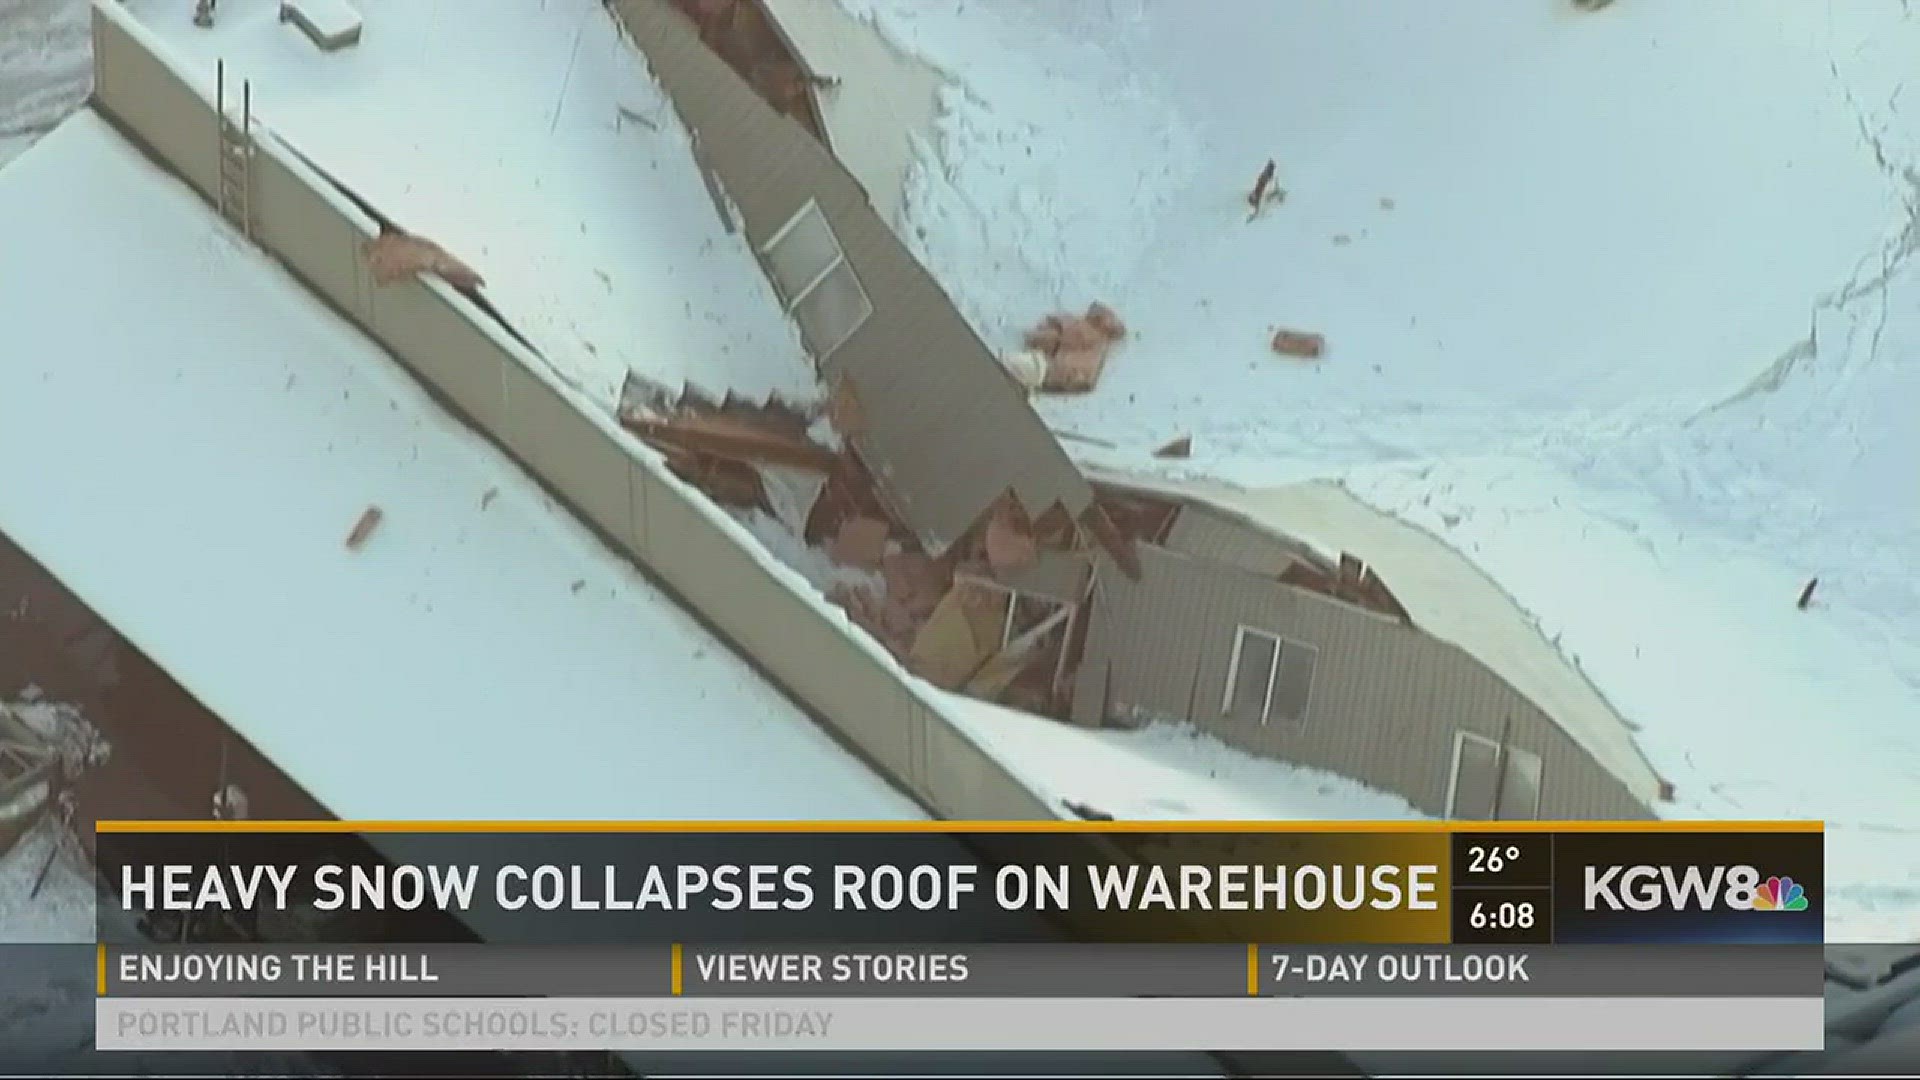 Heavy snow collapses roof on warehouse